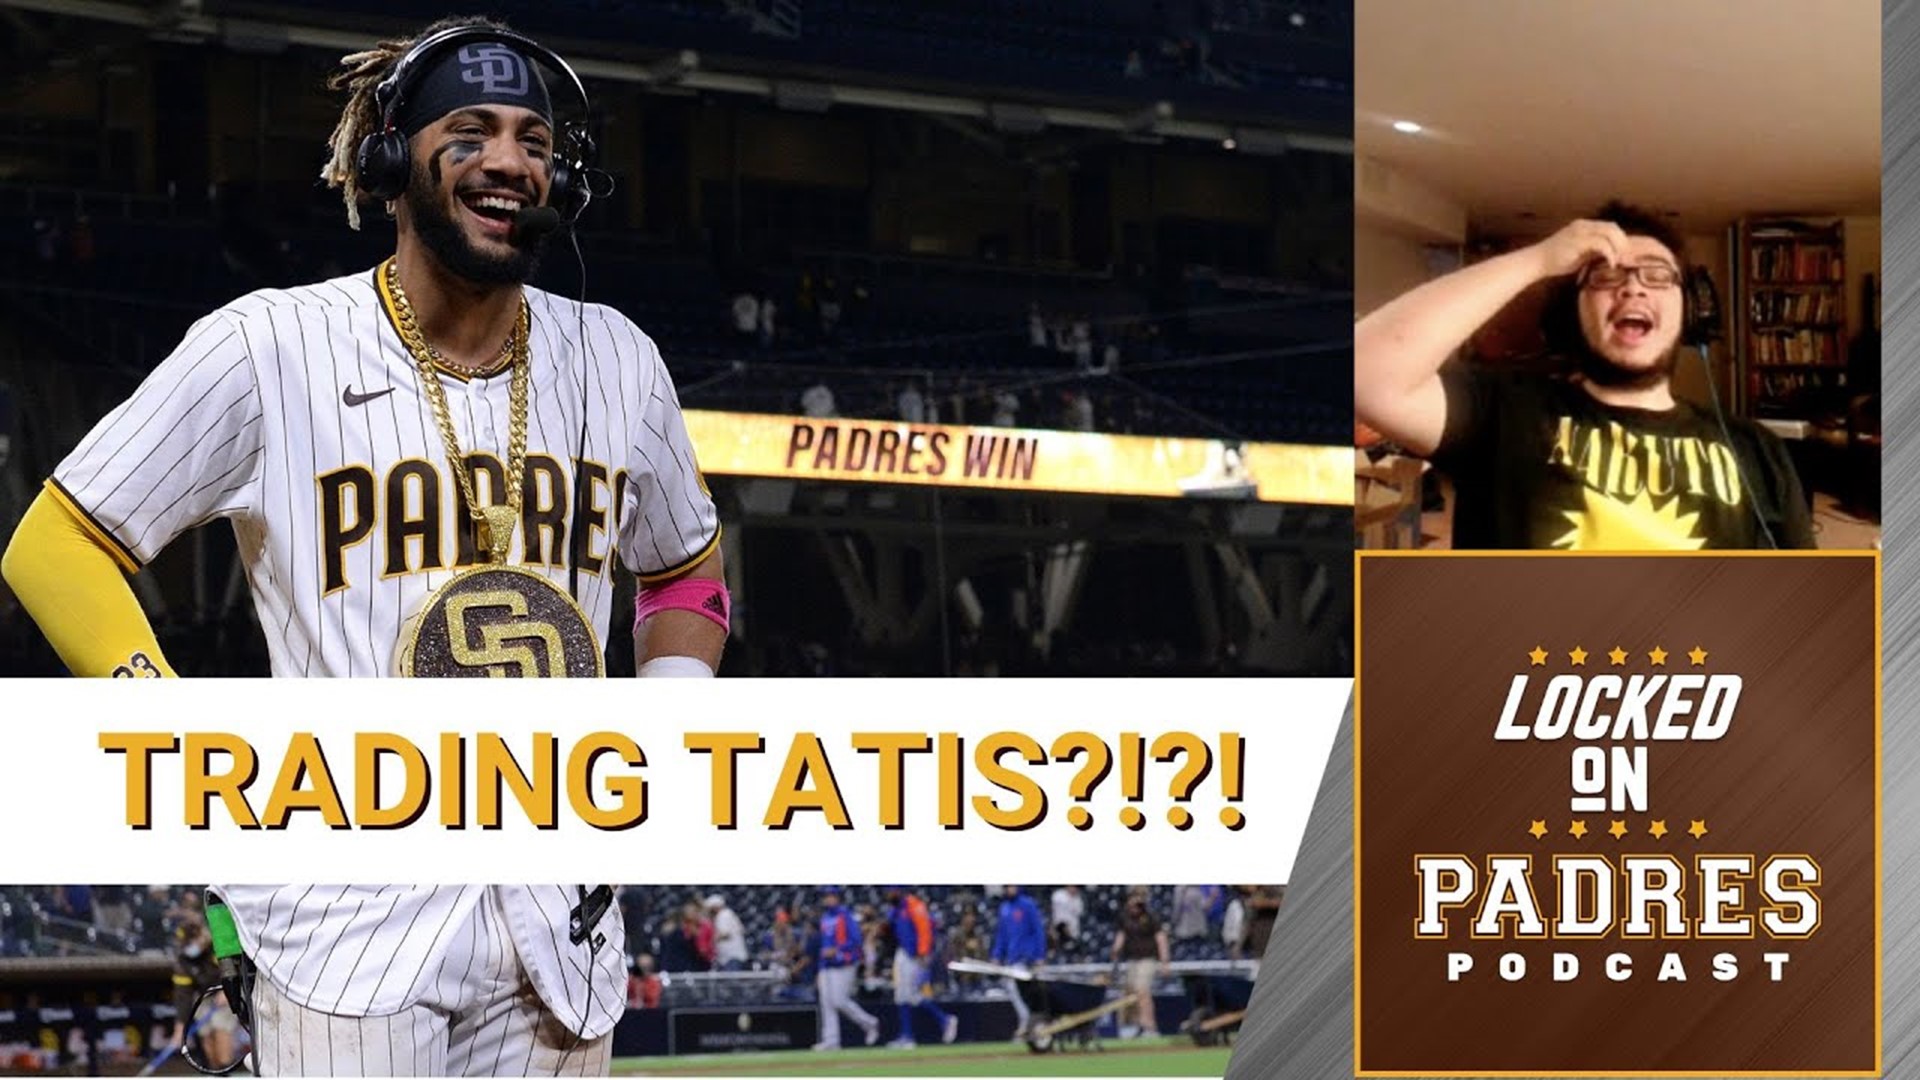 Set your phazers on disappointed: Fernando Tatis Twitter account confirmed  to be a fake